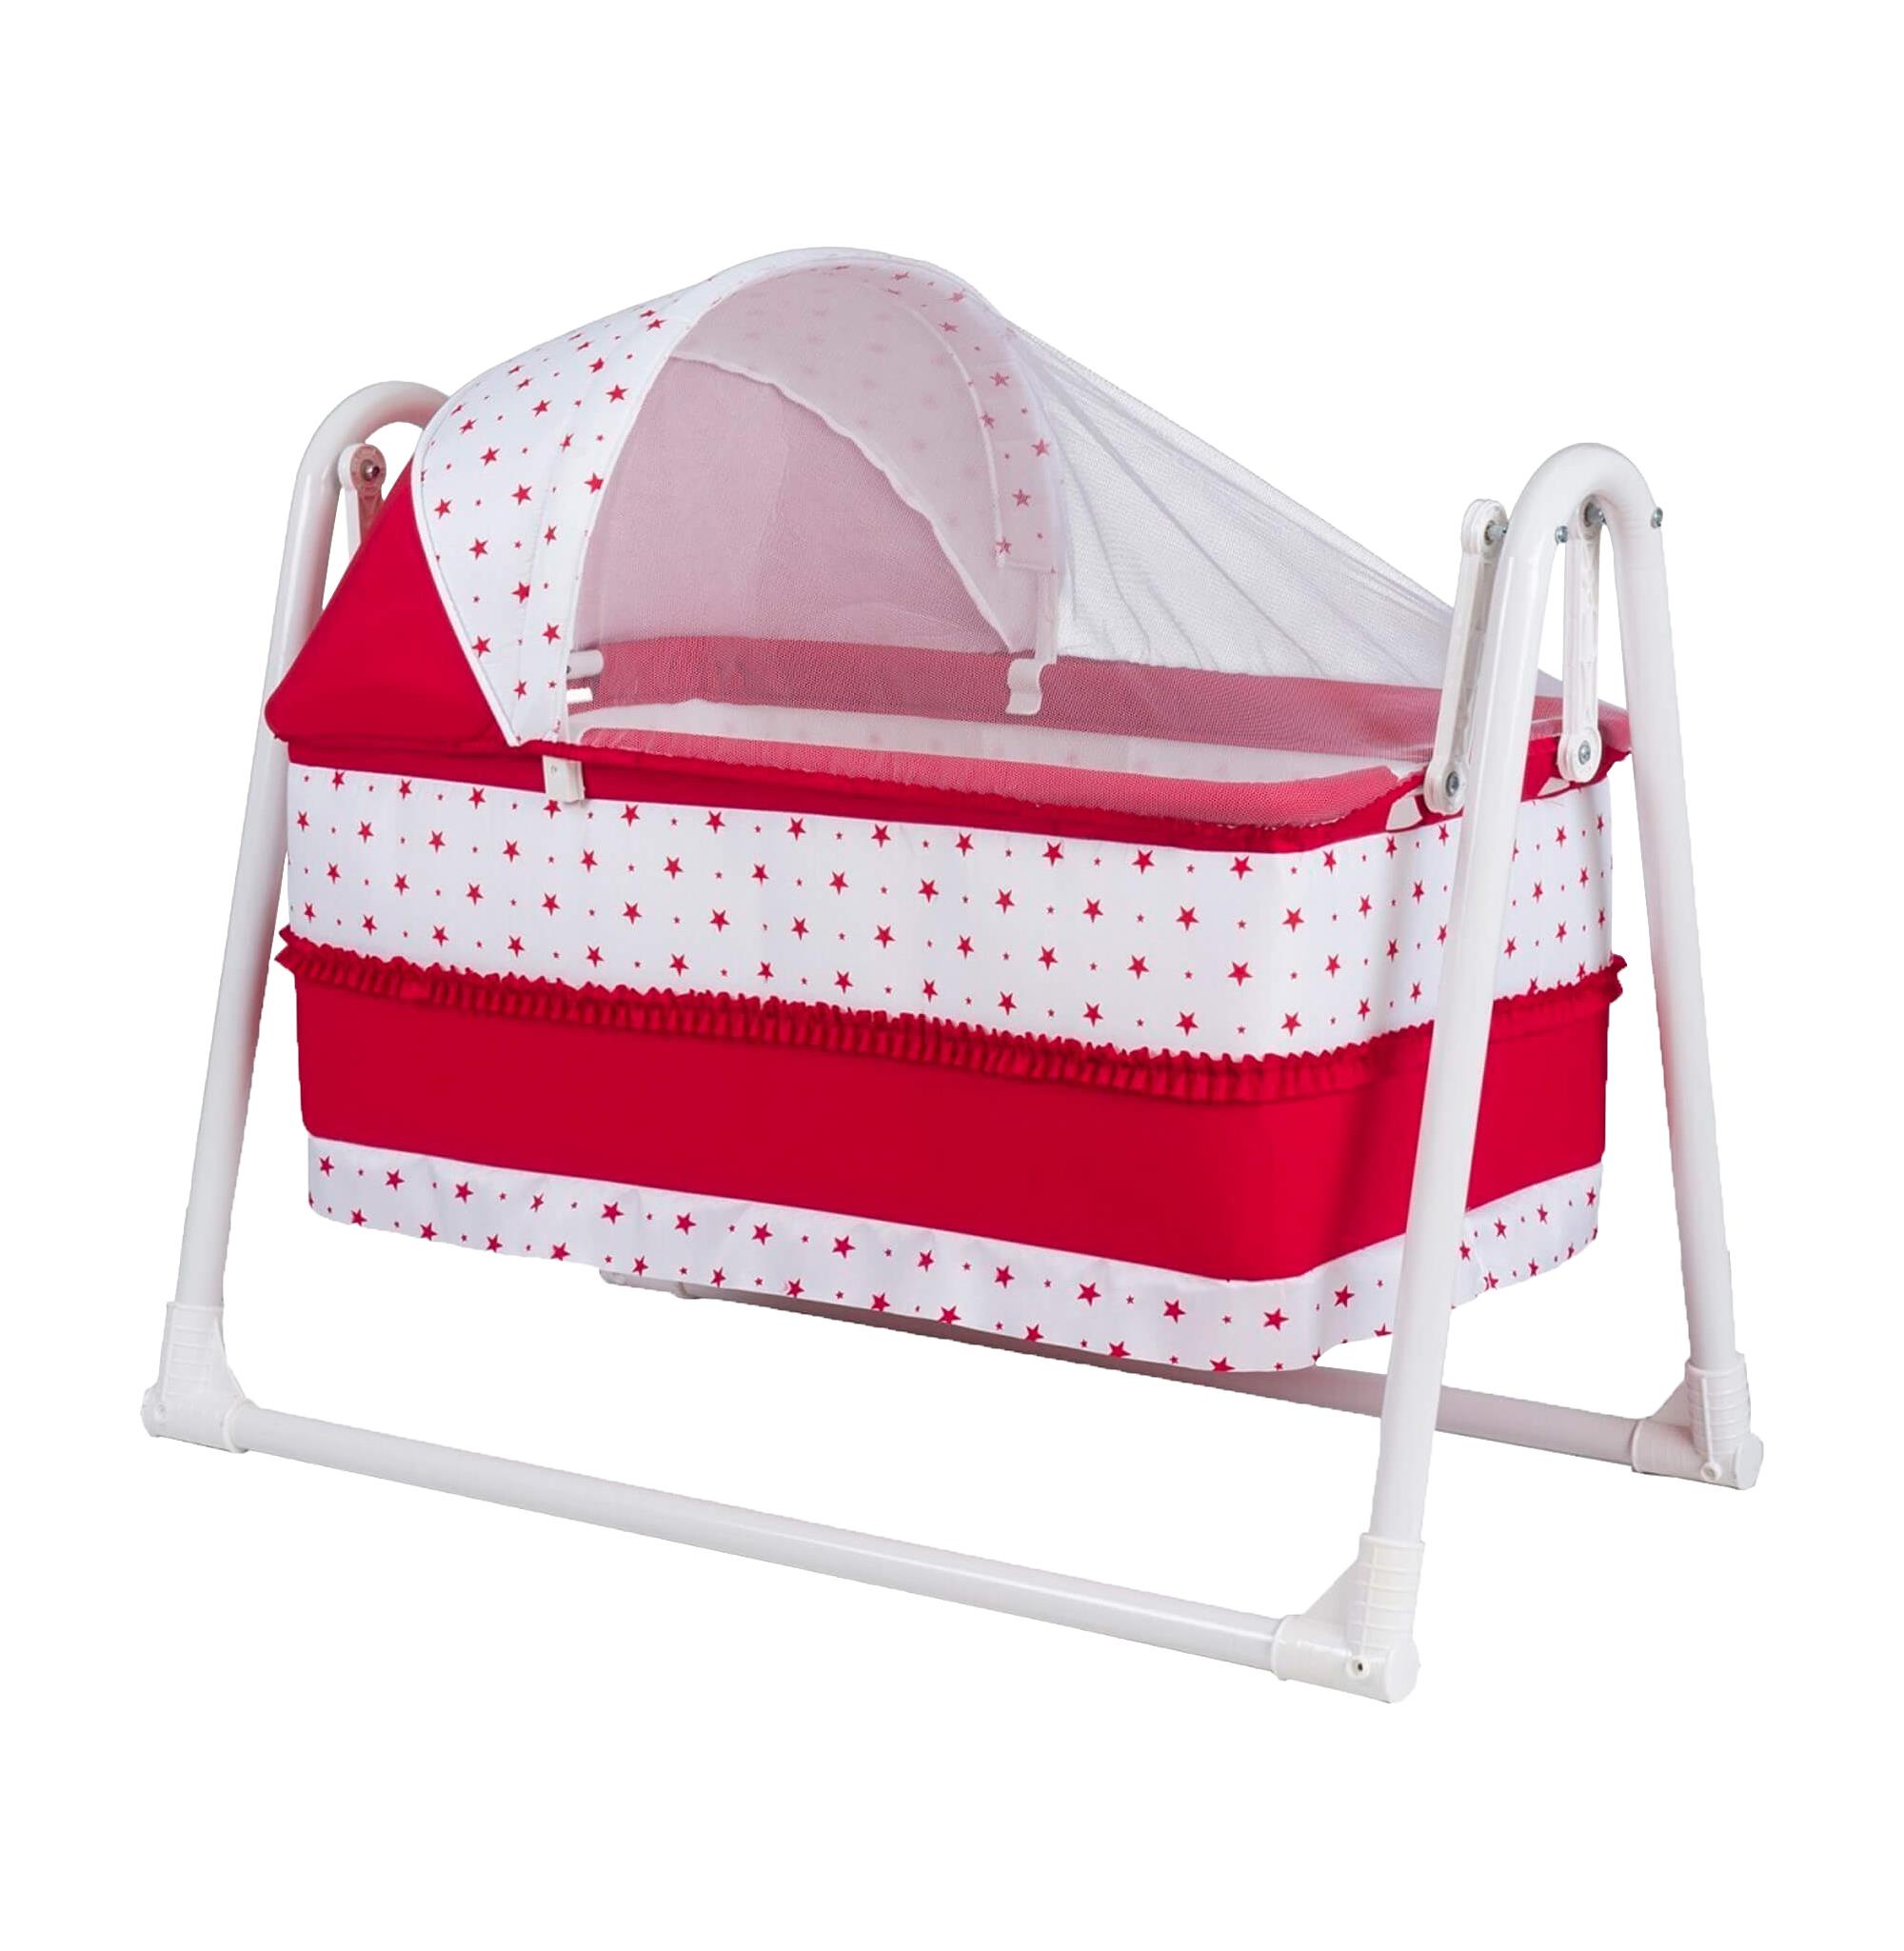 Chubby Baby Luxury Swinging Portable Basket with Awning Red